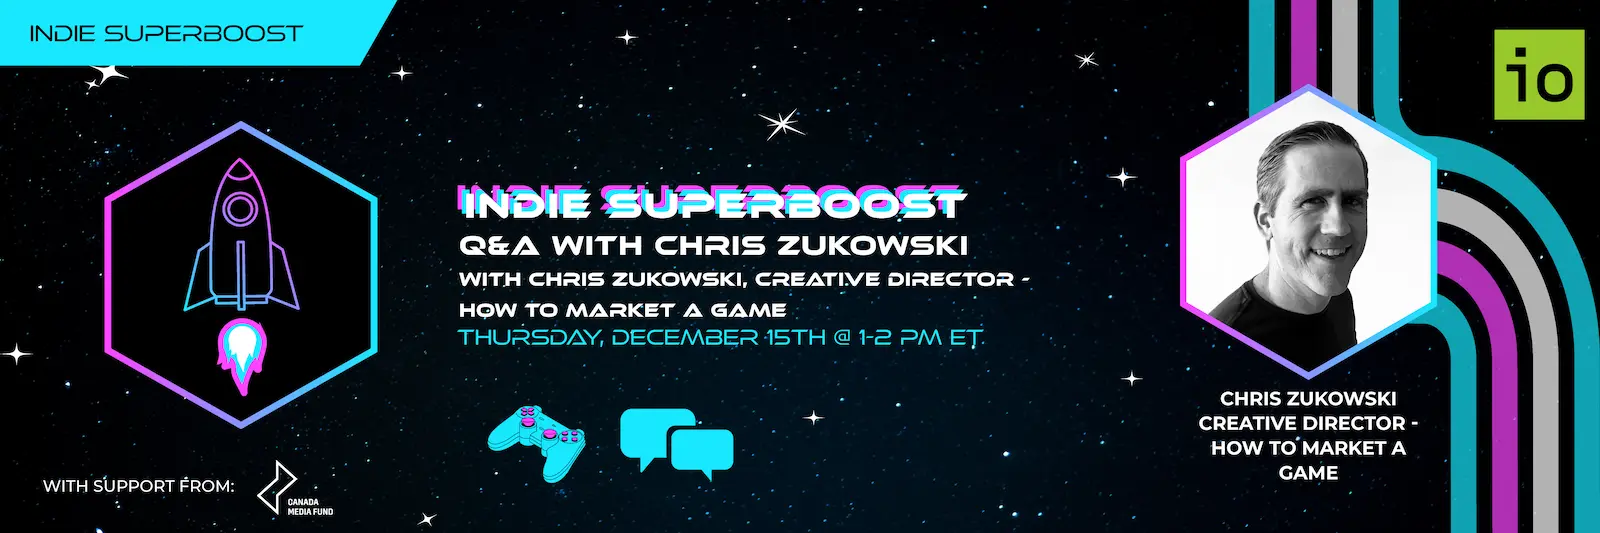 Indie Superboost: Q&A with Chris Zukowski, Creative Director at HowToMarketAGame.com